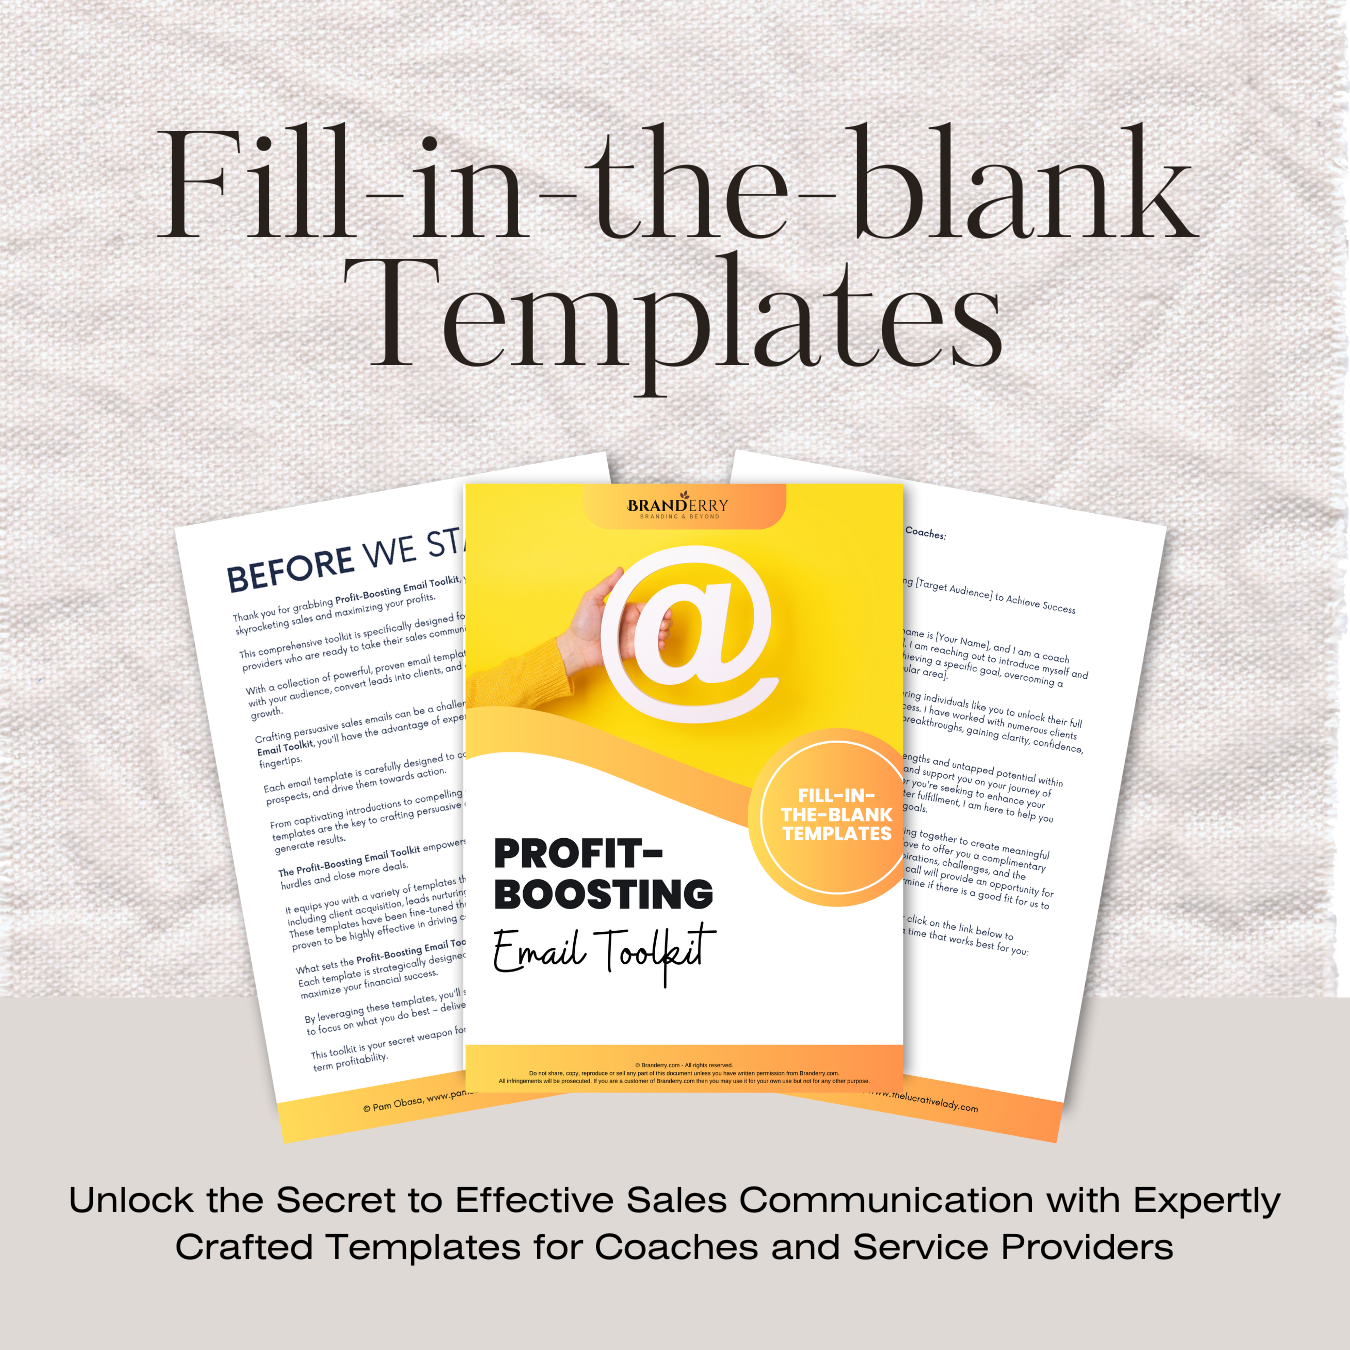 Profit-Boosting Email Toolkit